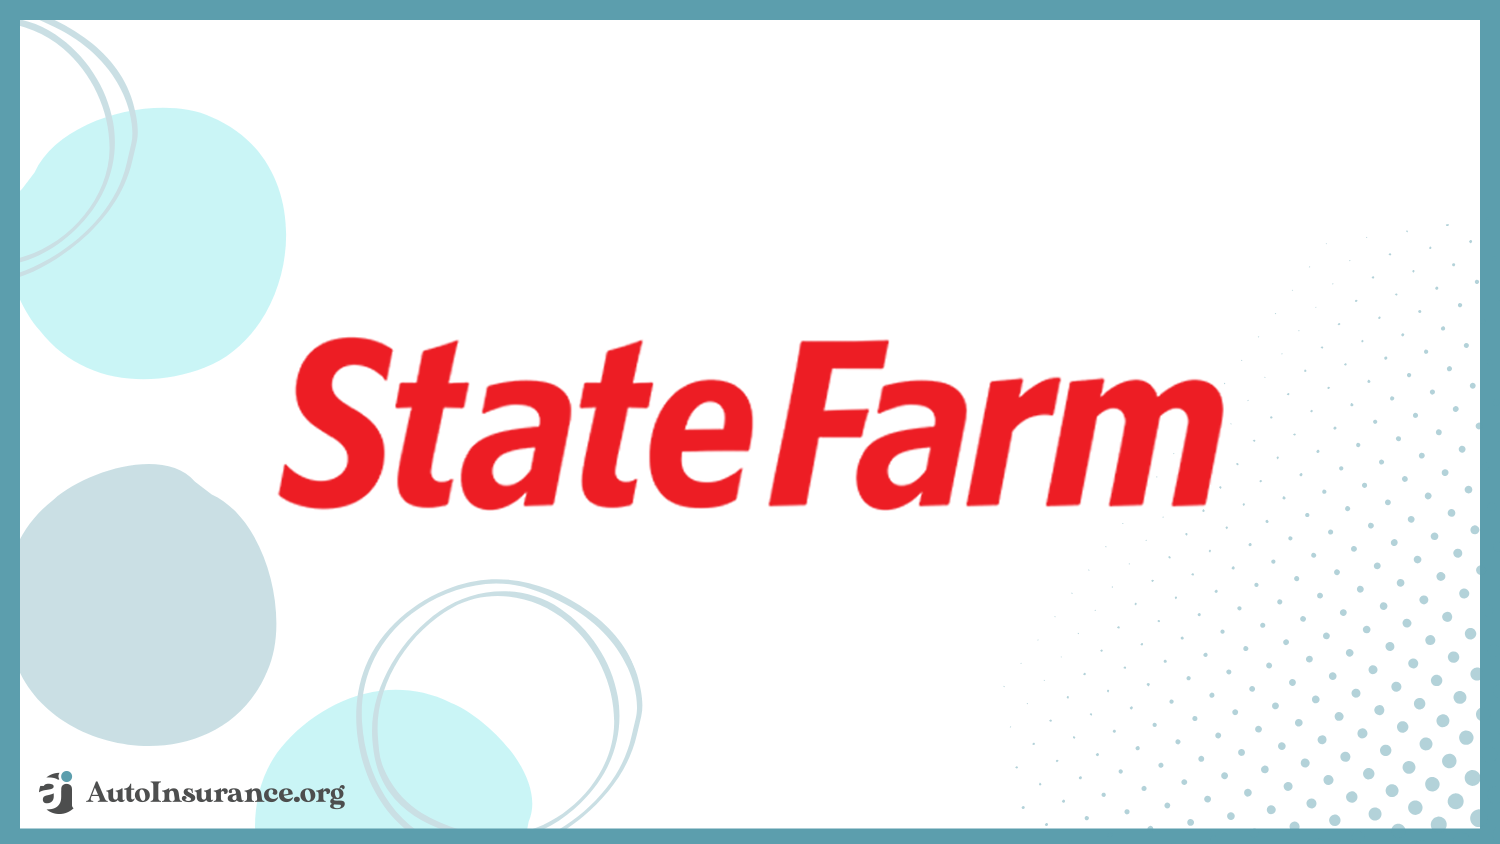 State Farm: Best Auto Insurance for Turbo Cars